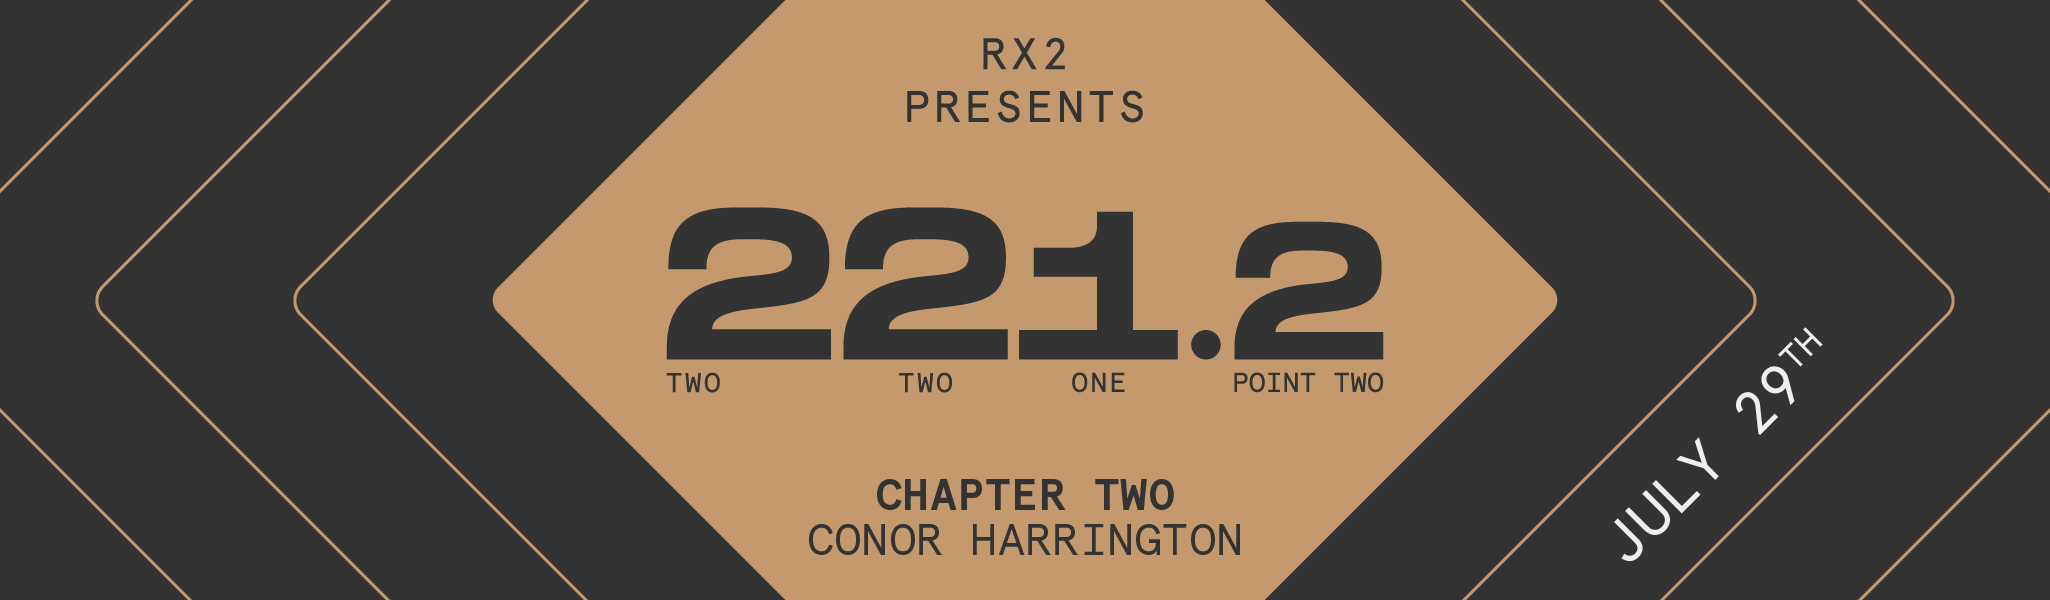 RX2 PRESENTS 221.2 CHAPTER TWO Conor Harrington